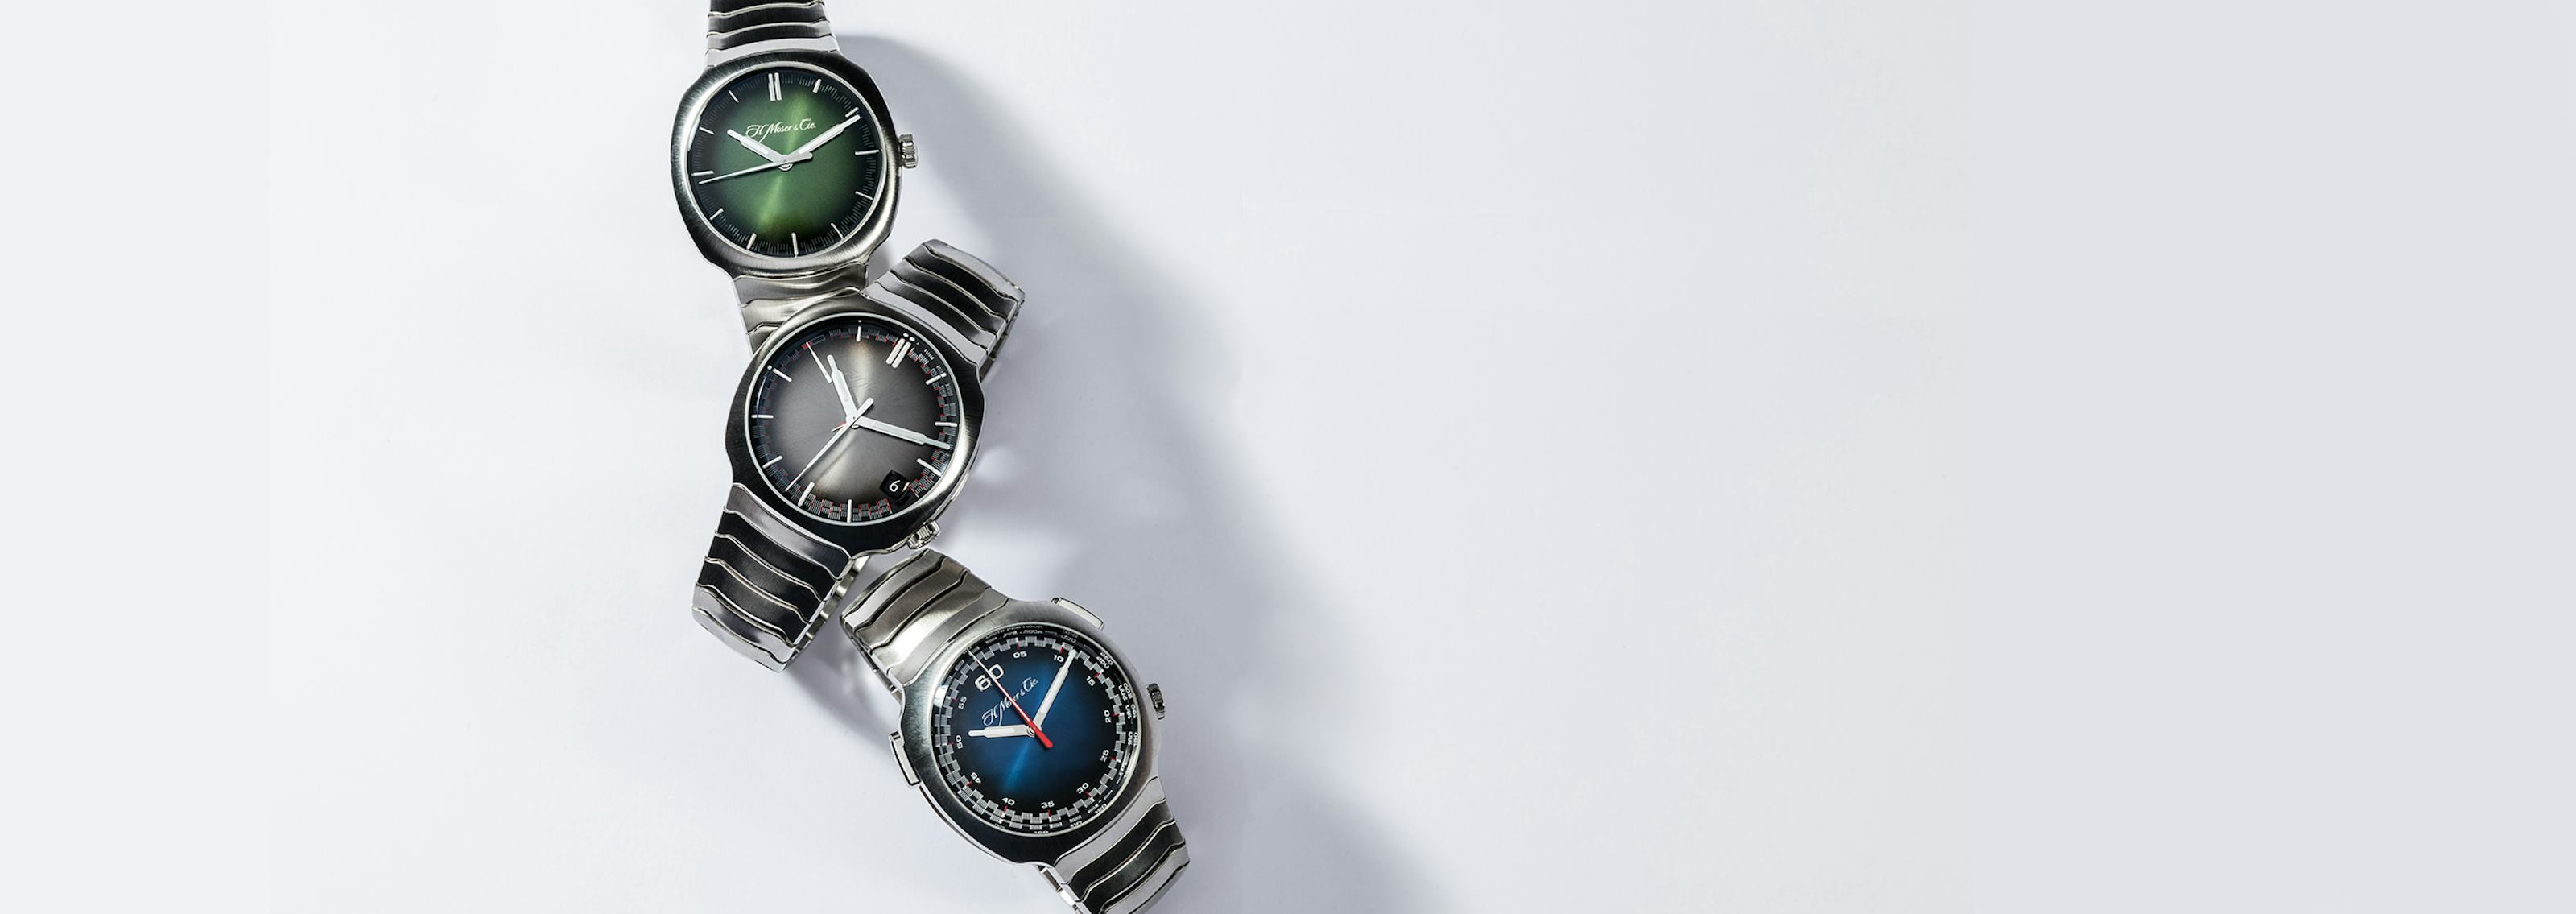 The Stainless Steel Sports Watch—What Comes Next?